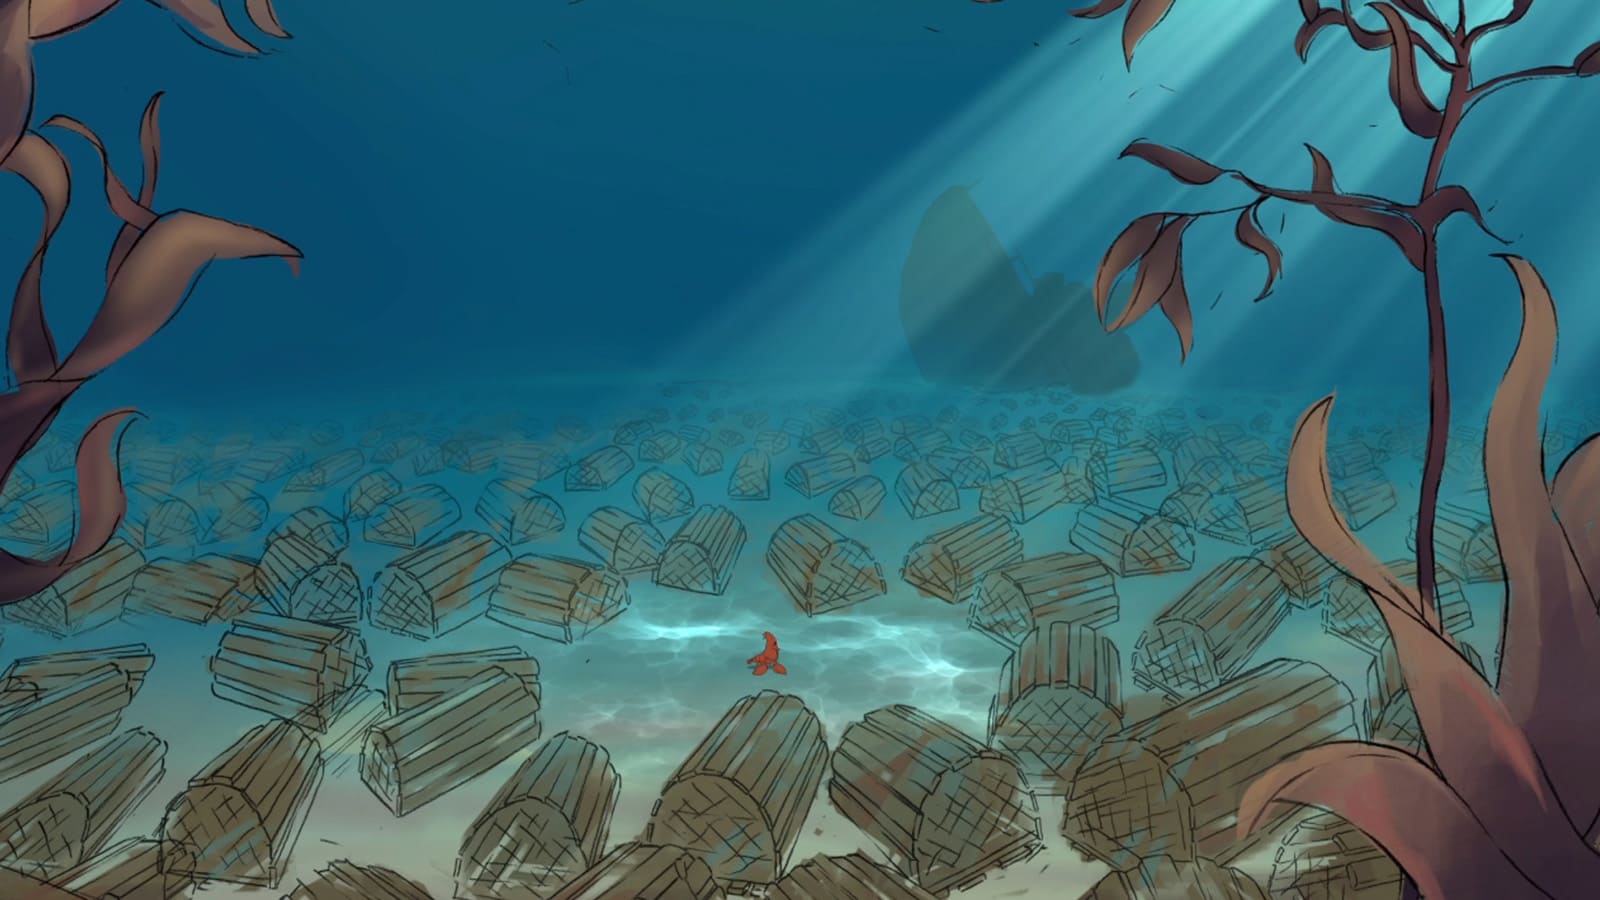 The deep sea is full of boxes and a sunk ship could be seen at the background